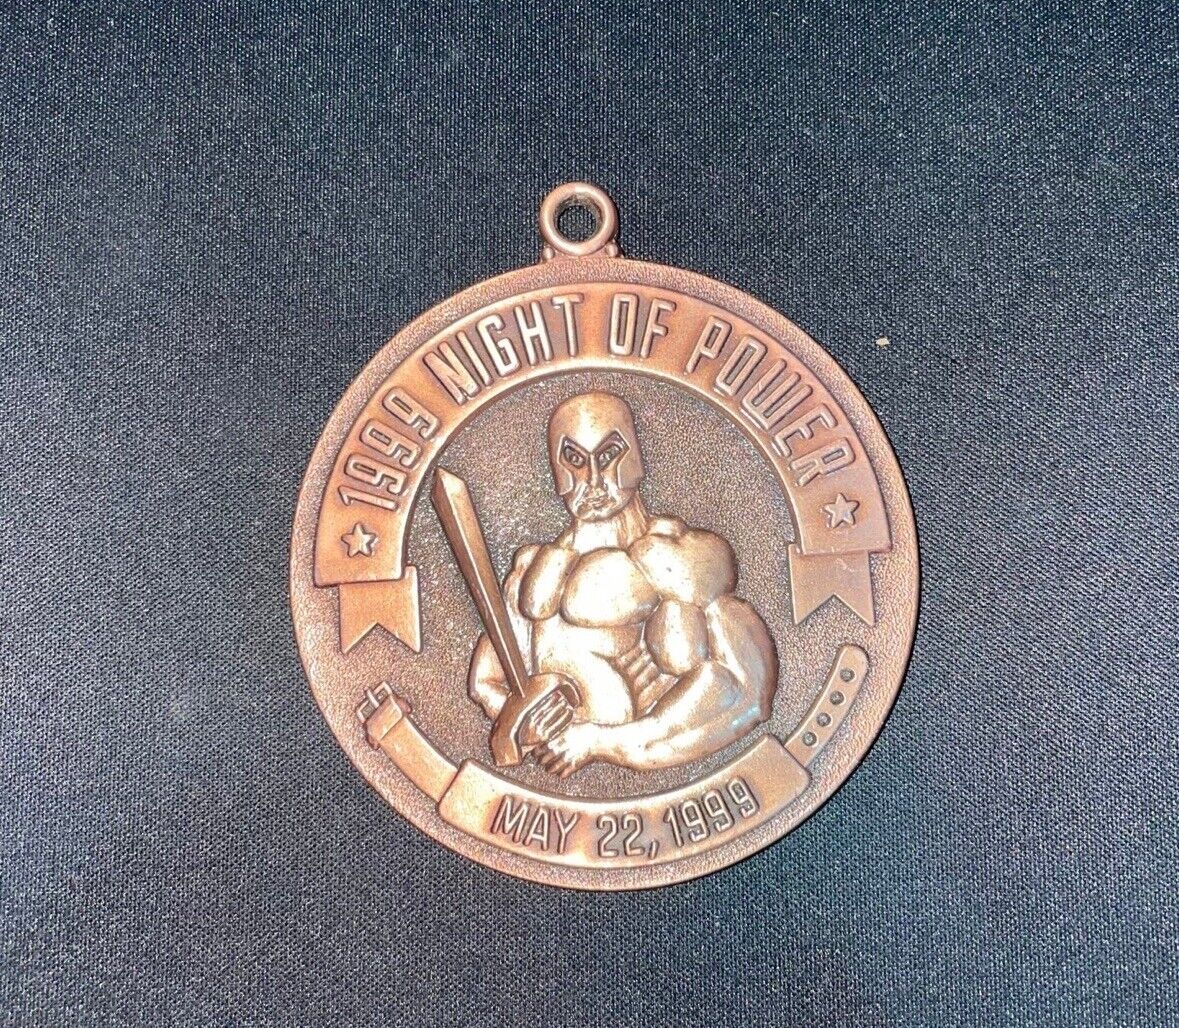 Solid Copper Budweiser May 22 1999 “Night of Power” Blank Medallion Pendant